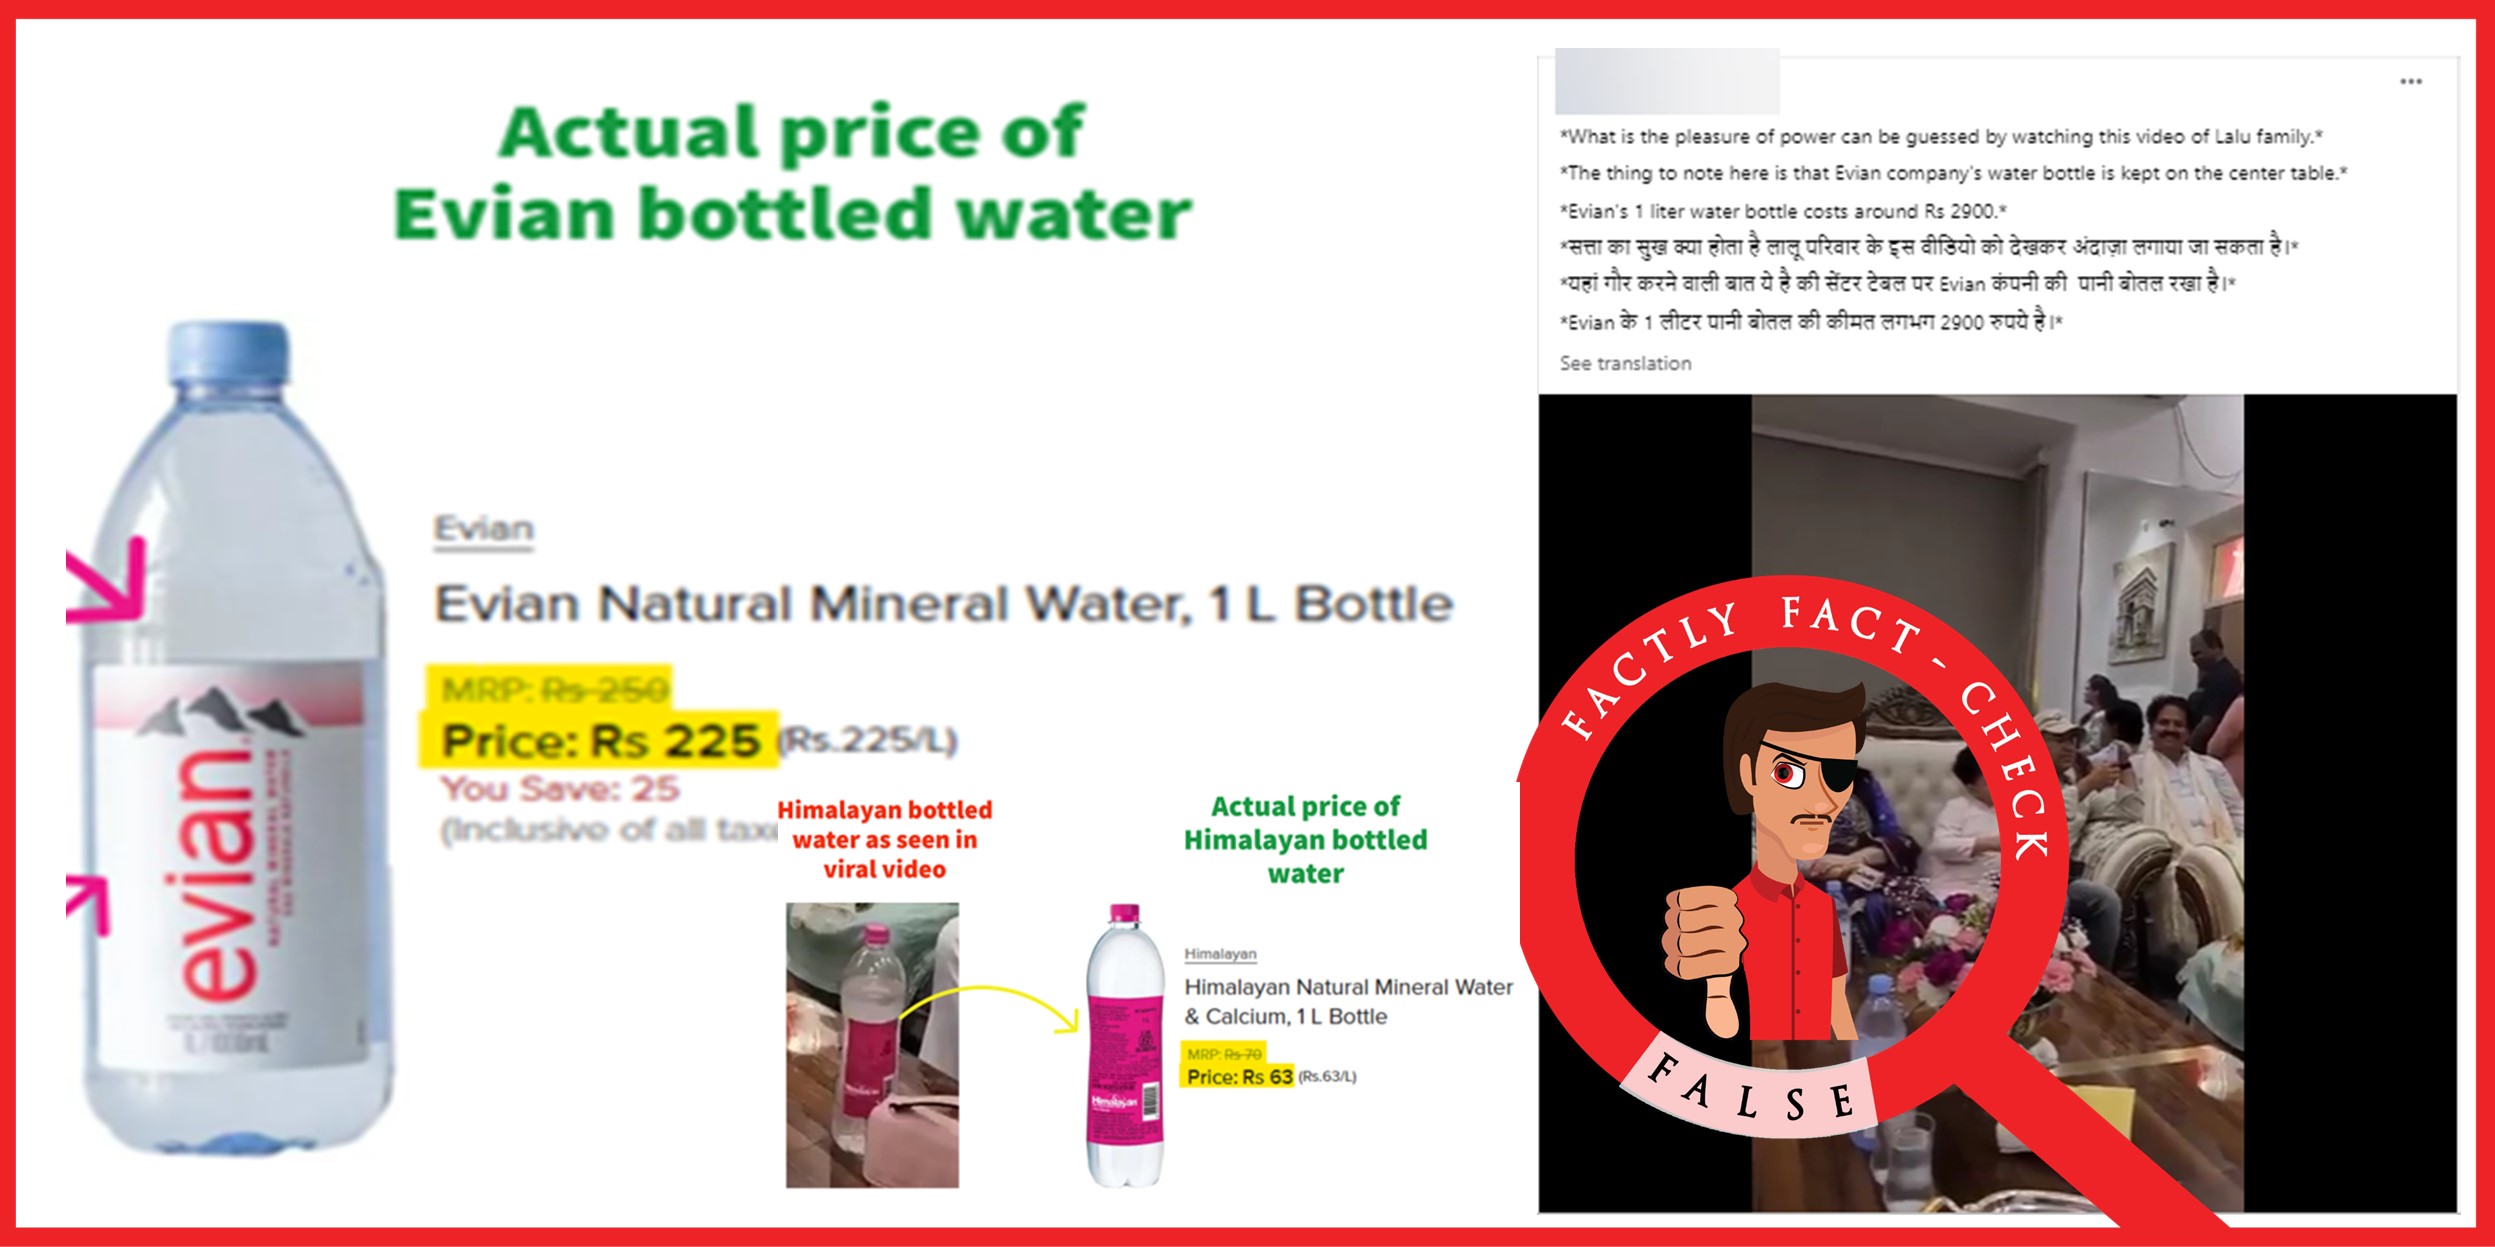 The cost of Evian bottled water seen in this video is ₹250, not ₹2900 -  FACTLY